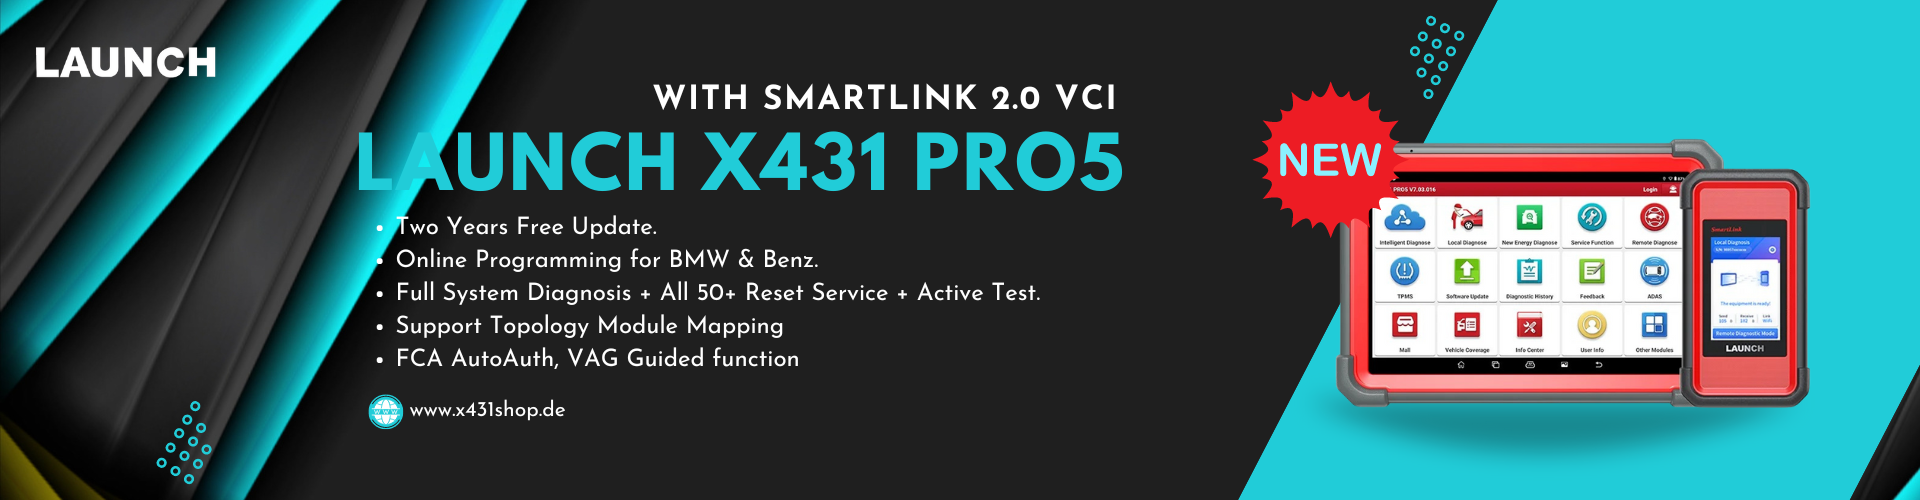 LAUNCH X431 PRO5 WITH SMARTLINK 2.0